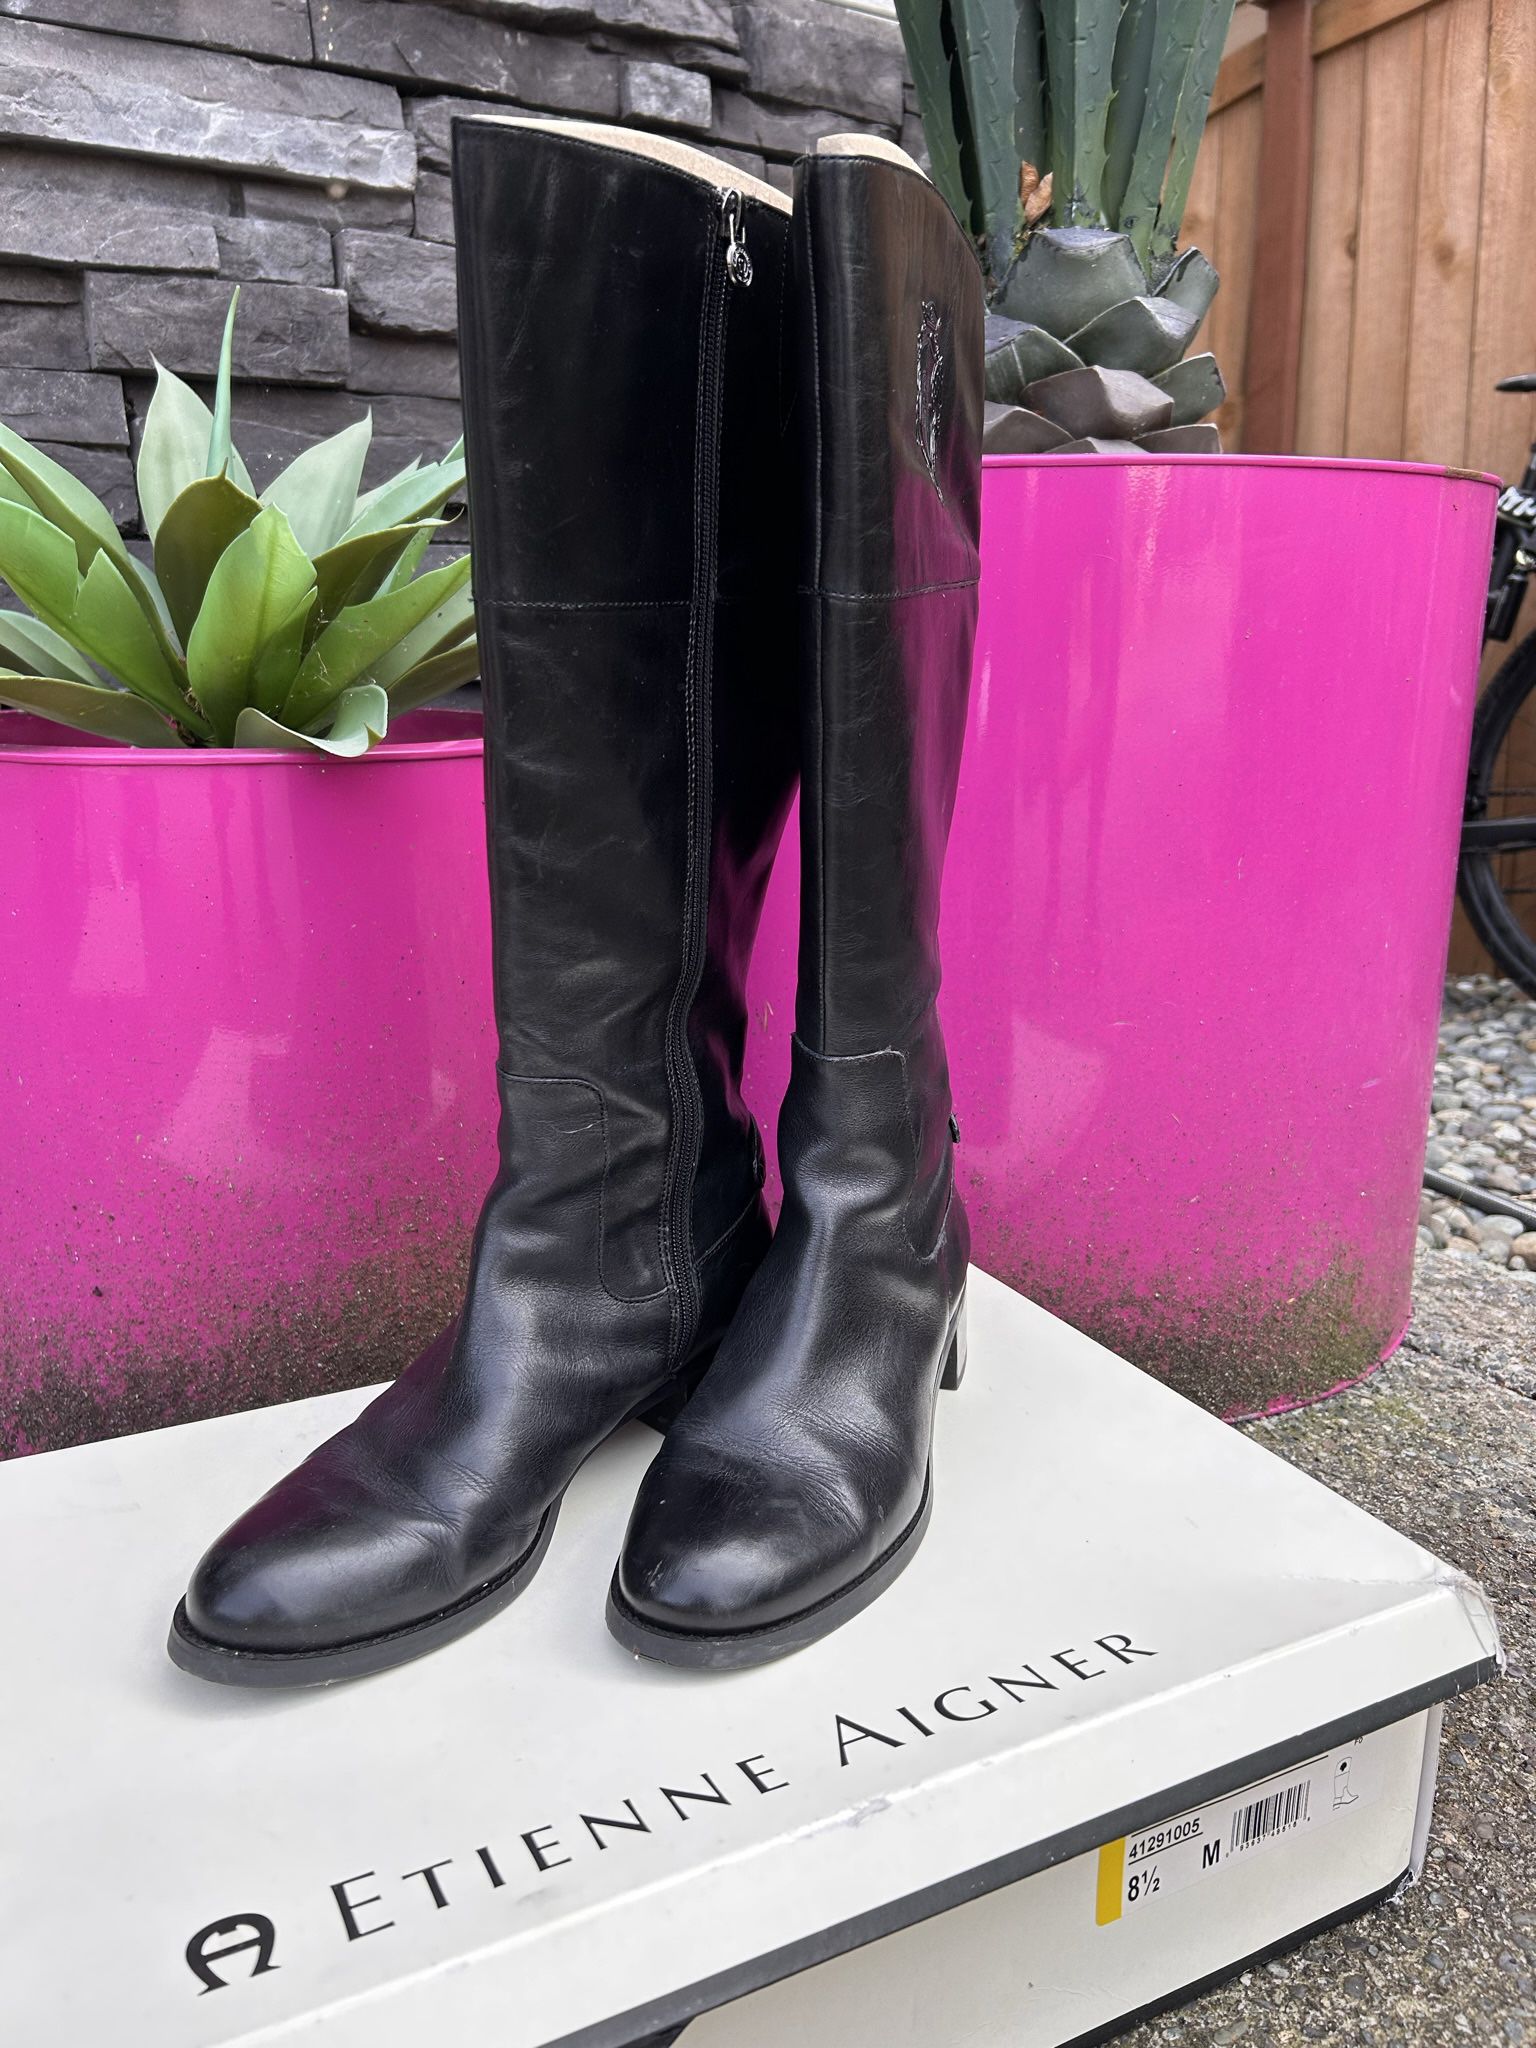 Etienne Aigner Black leather riding boots 8.5, wide shaft *Like new* 